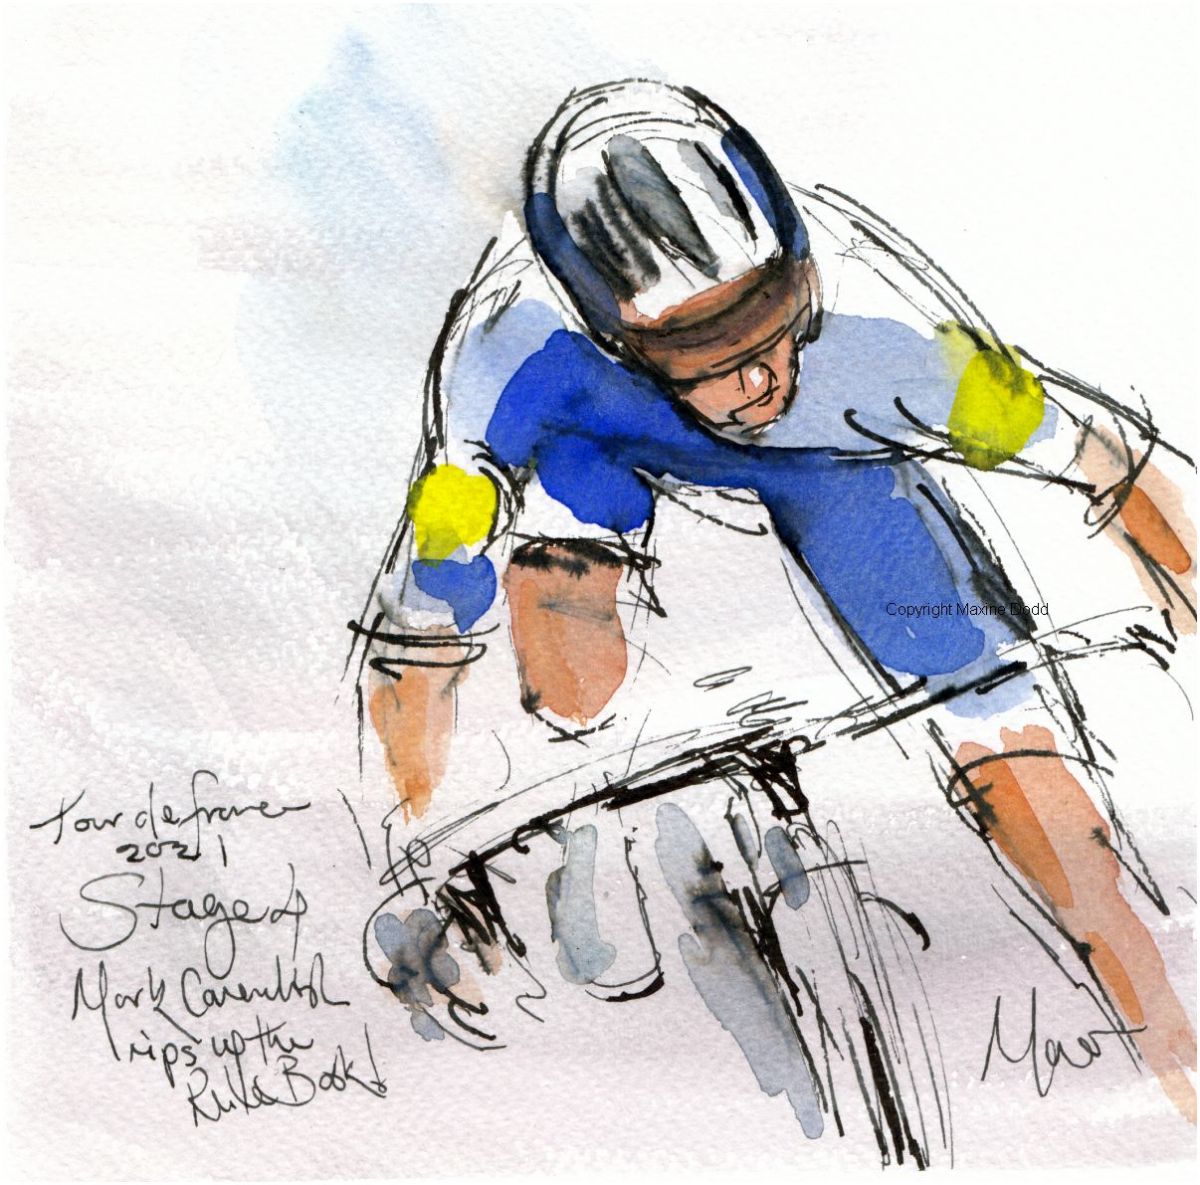 Tour de France 2021 - Stage 4 - Mark Cavendish rips up the Rule Book! original watercolour painting Maxine Dodd - SOLD